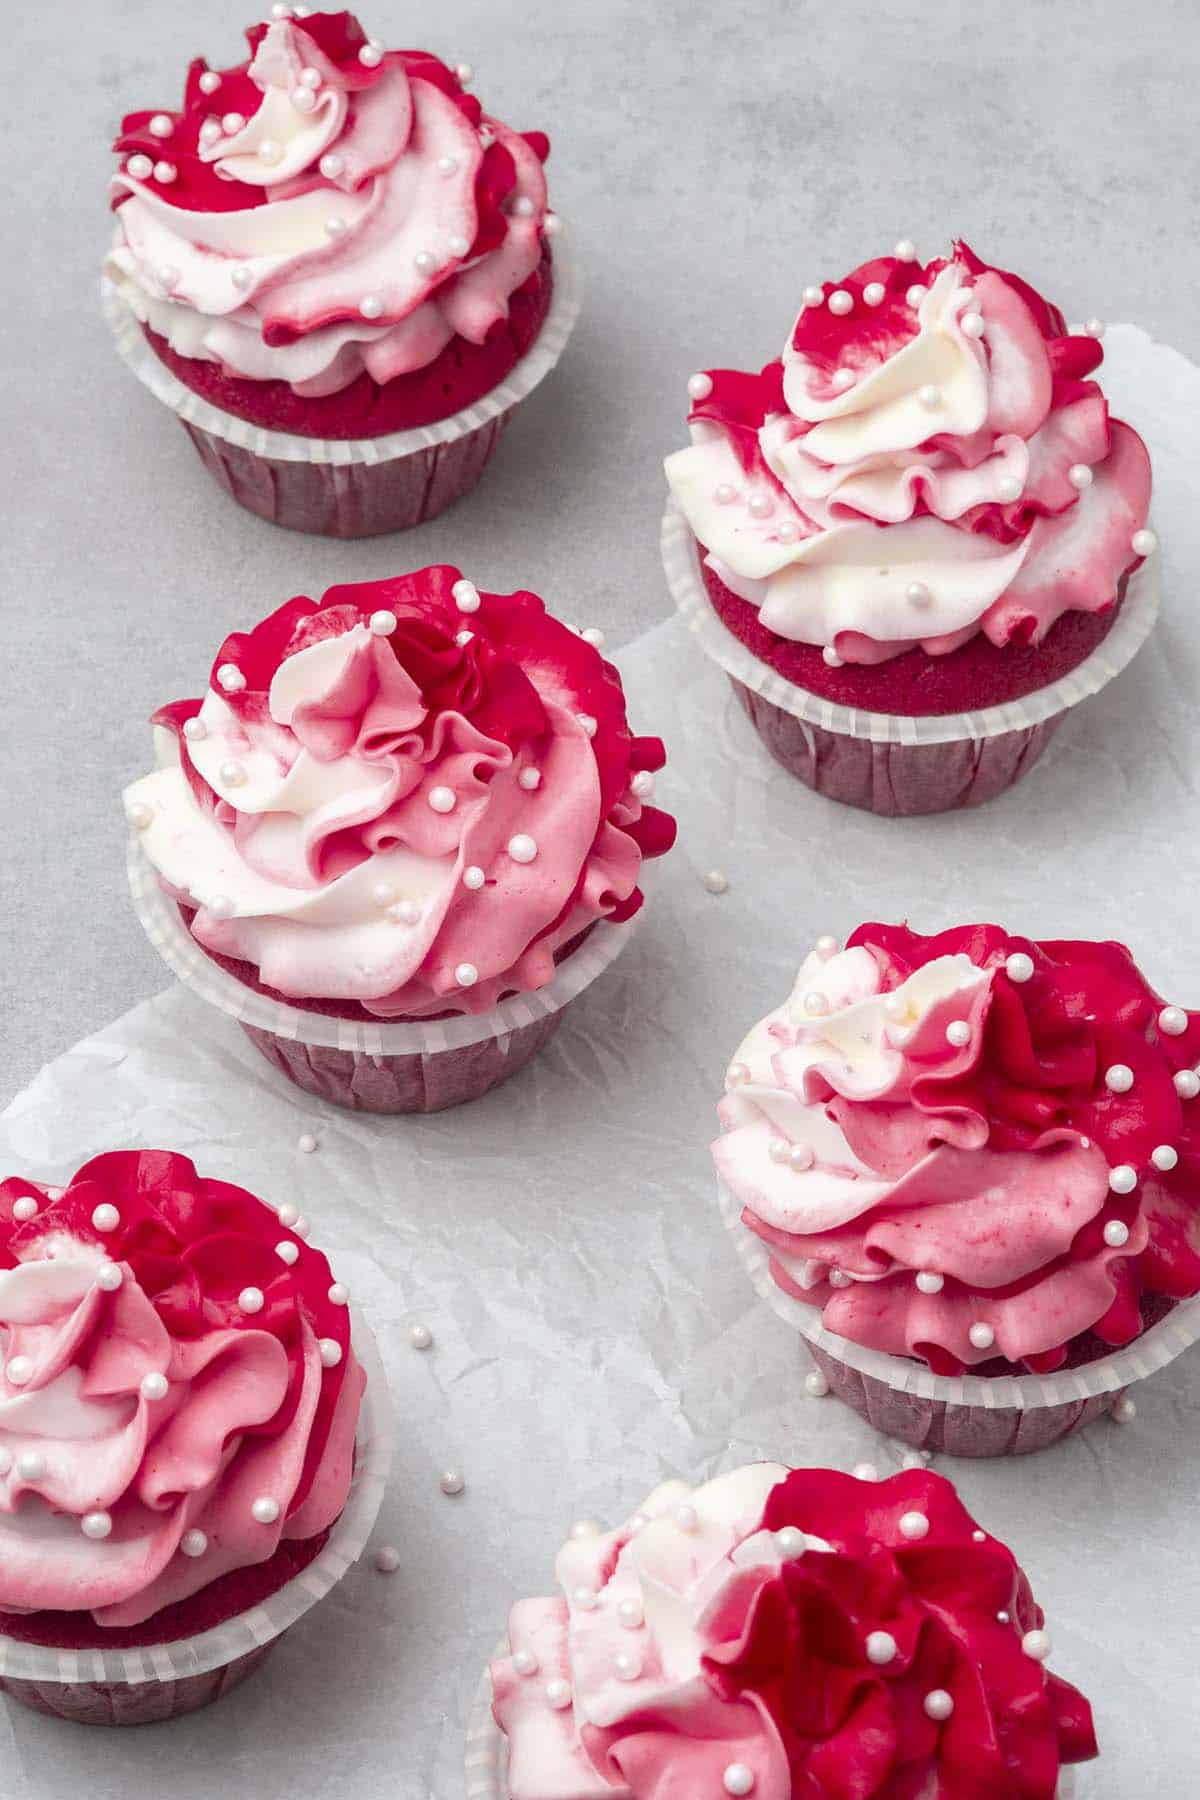 6 Pink cupcakes decorated with marbled colored frosting on a white surface.